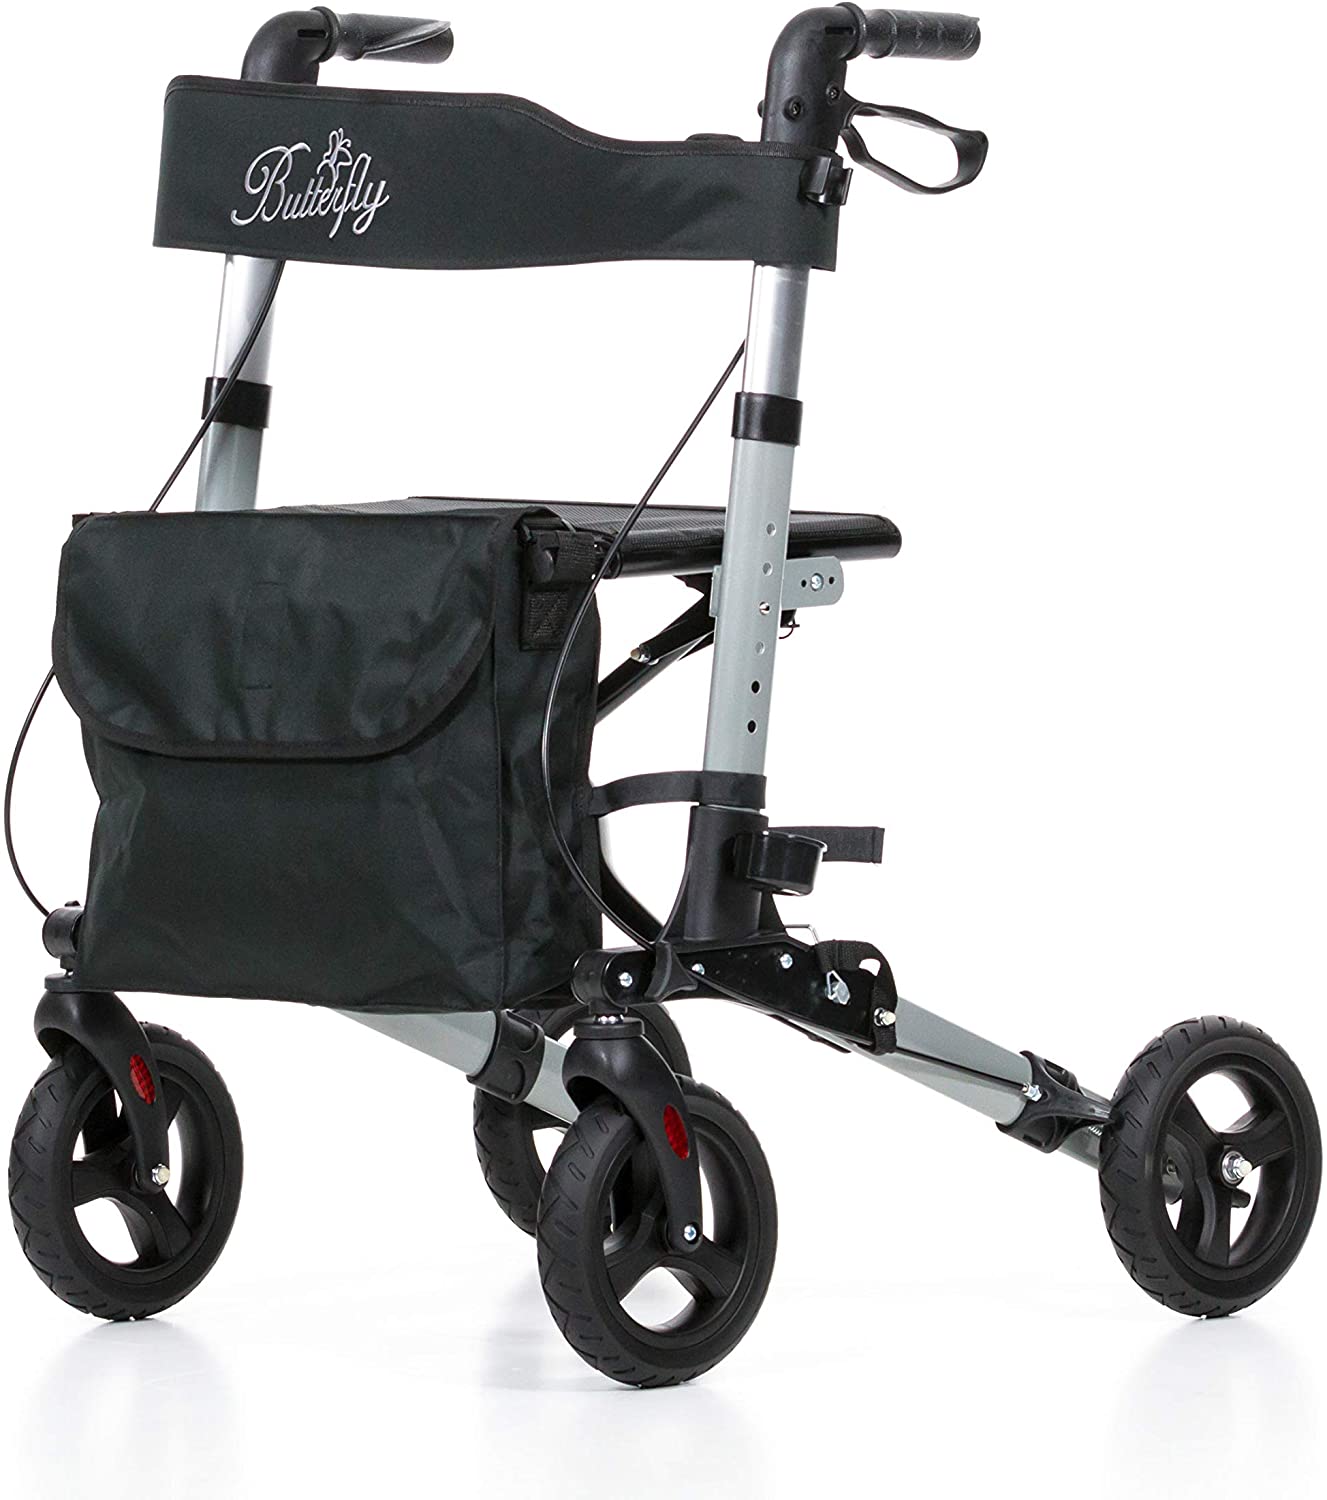 REHASHOP Lightweight Butterfly Rollator Anthracite with Soft Tyres